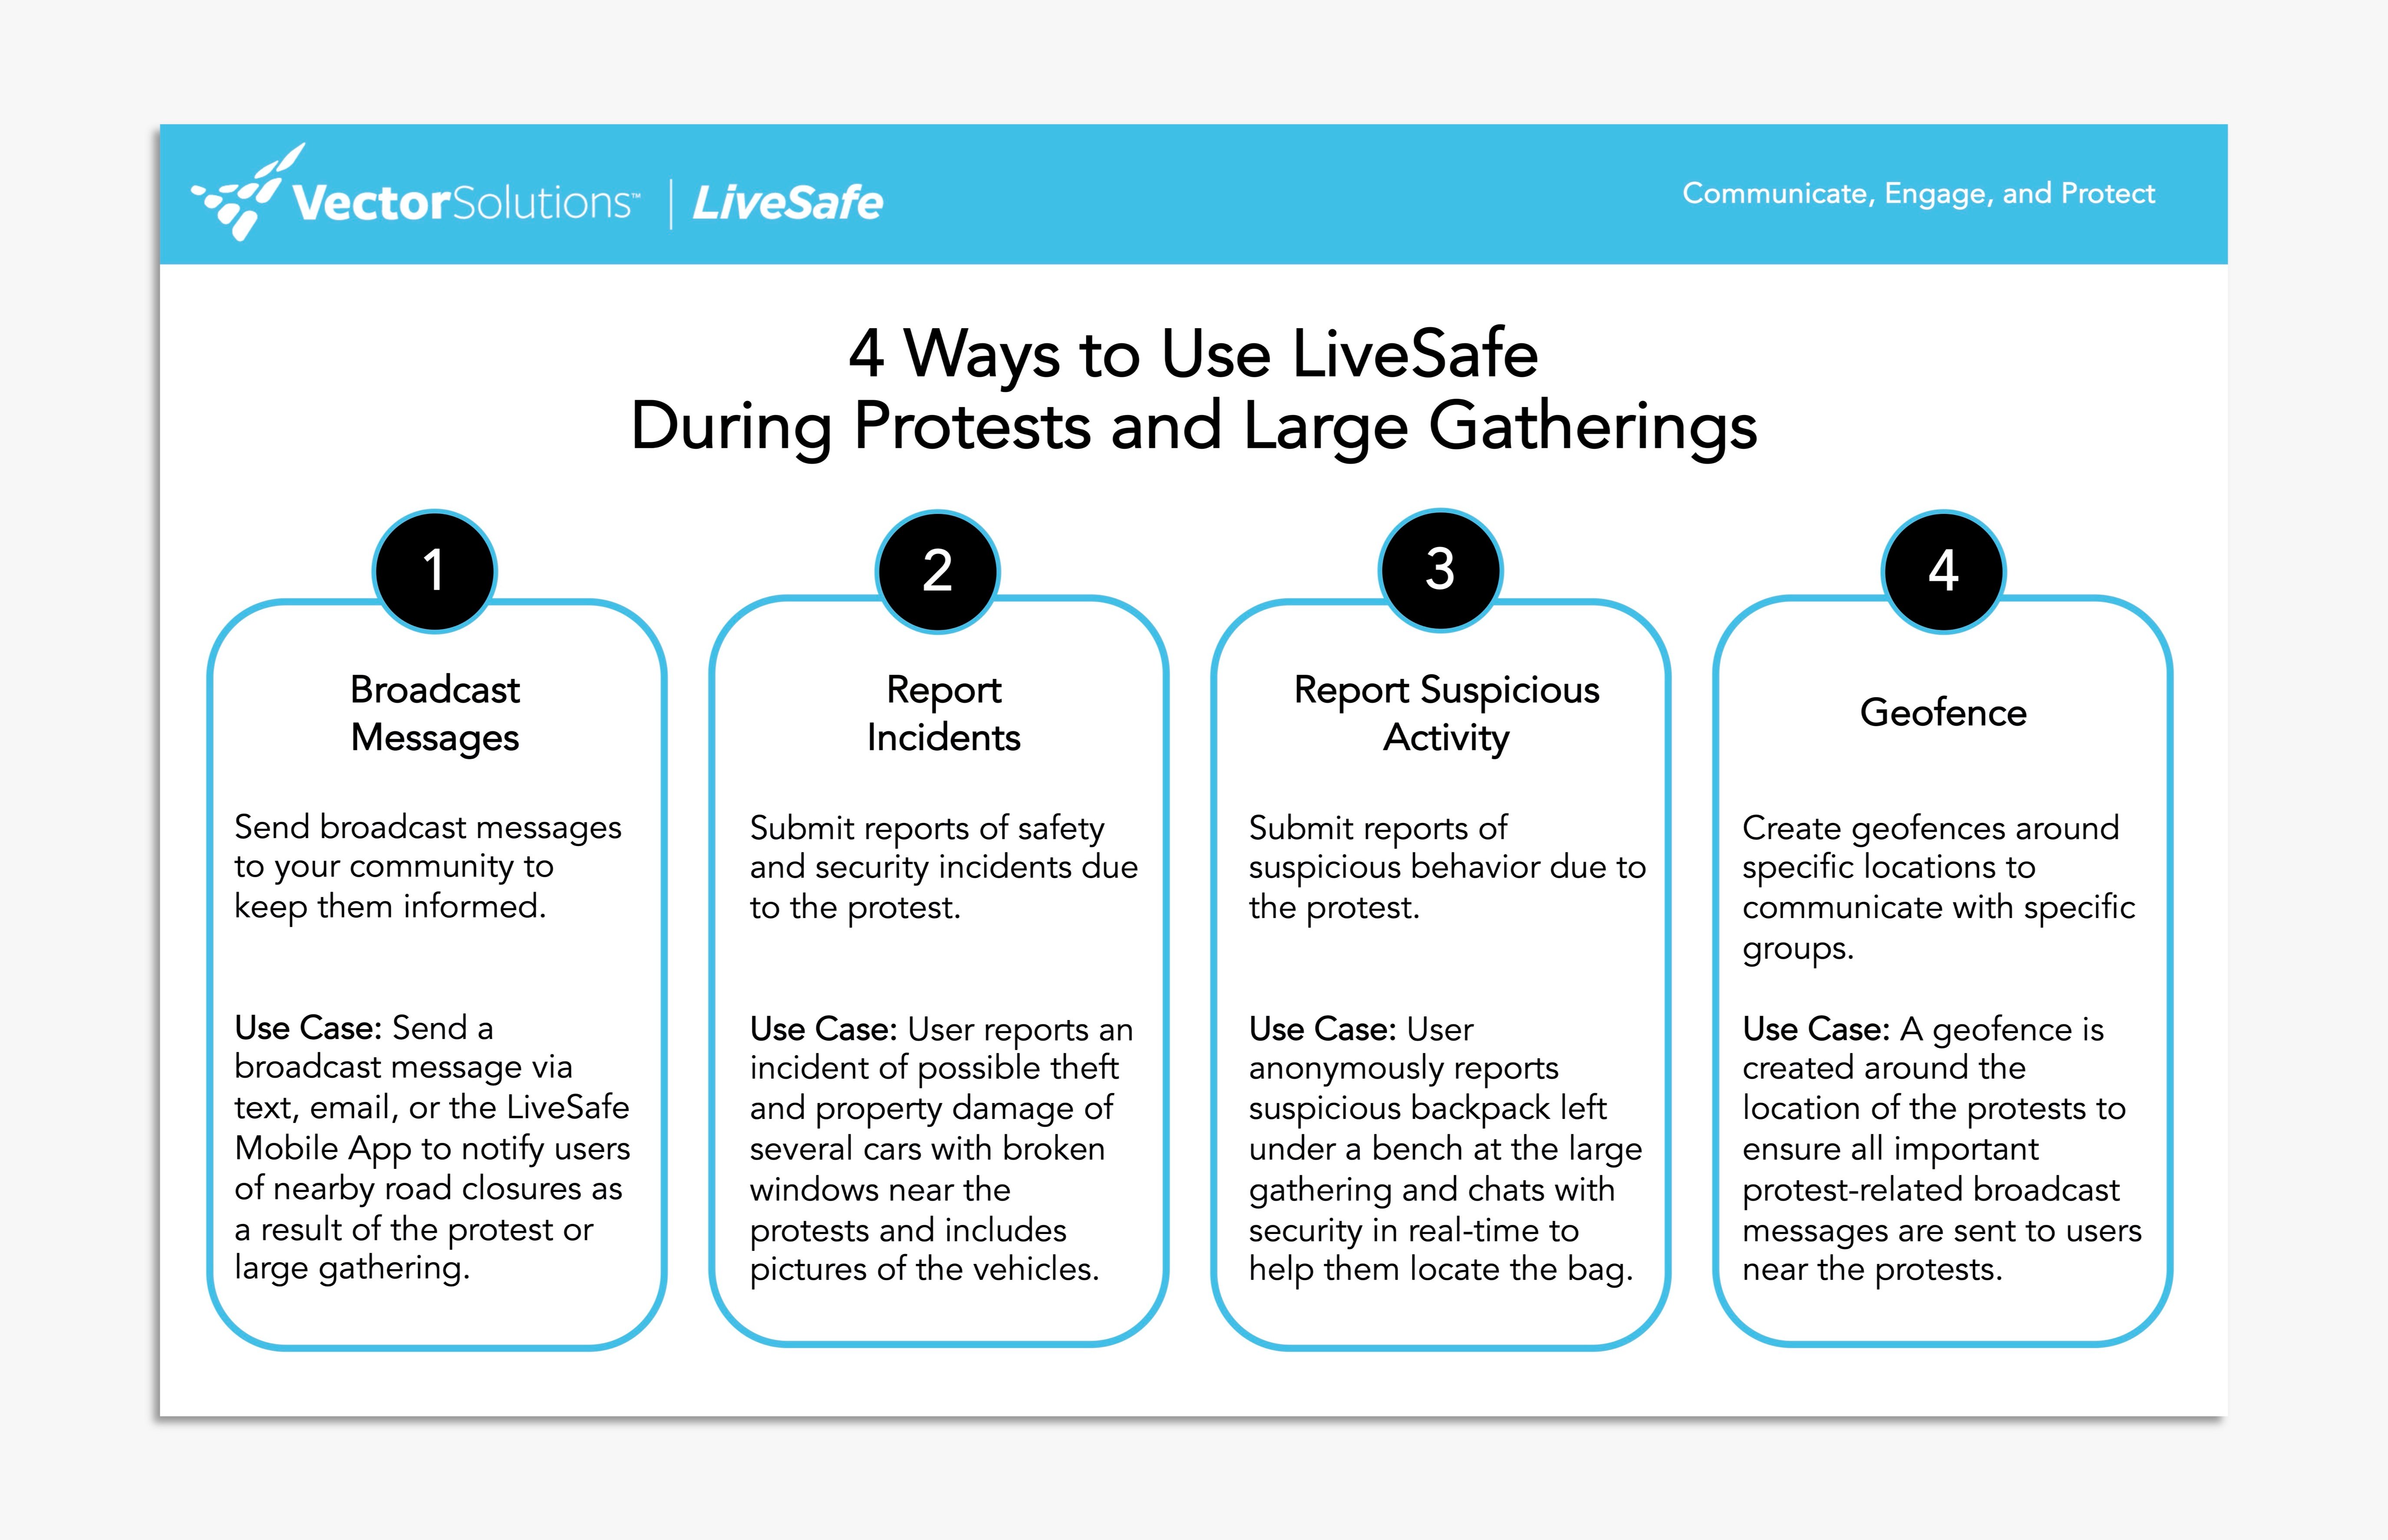 4 Ways to Use LiveSafe During Protests _ Large Gatherings (1)